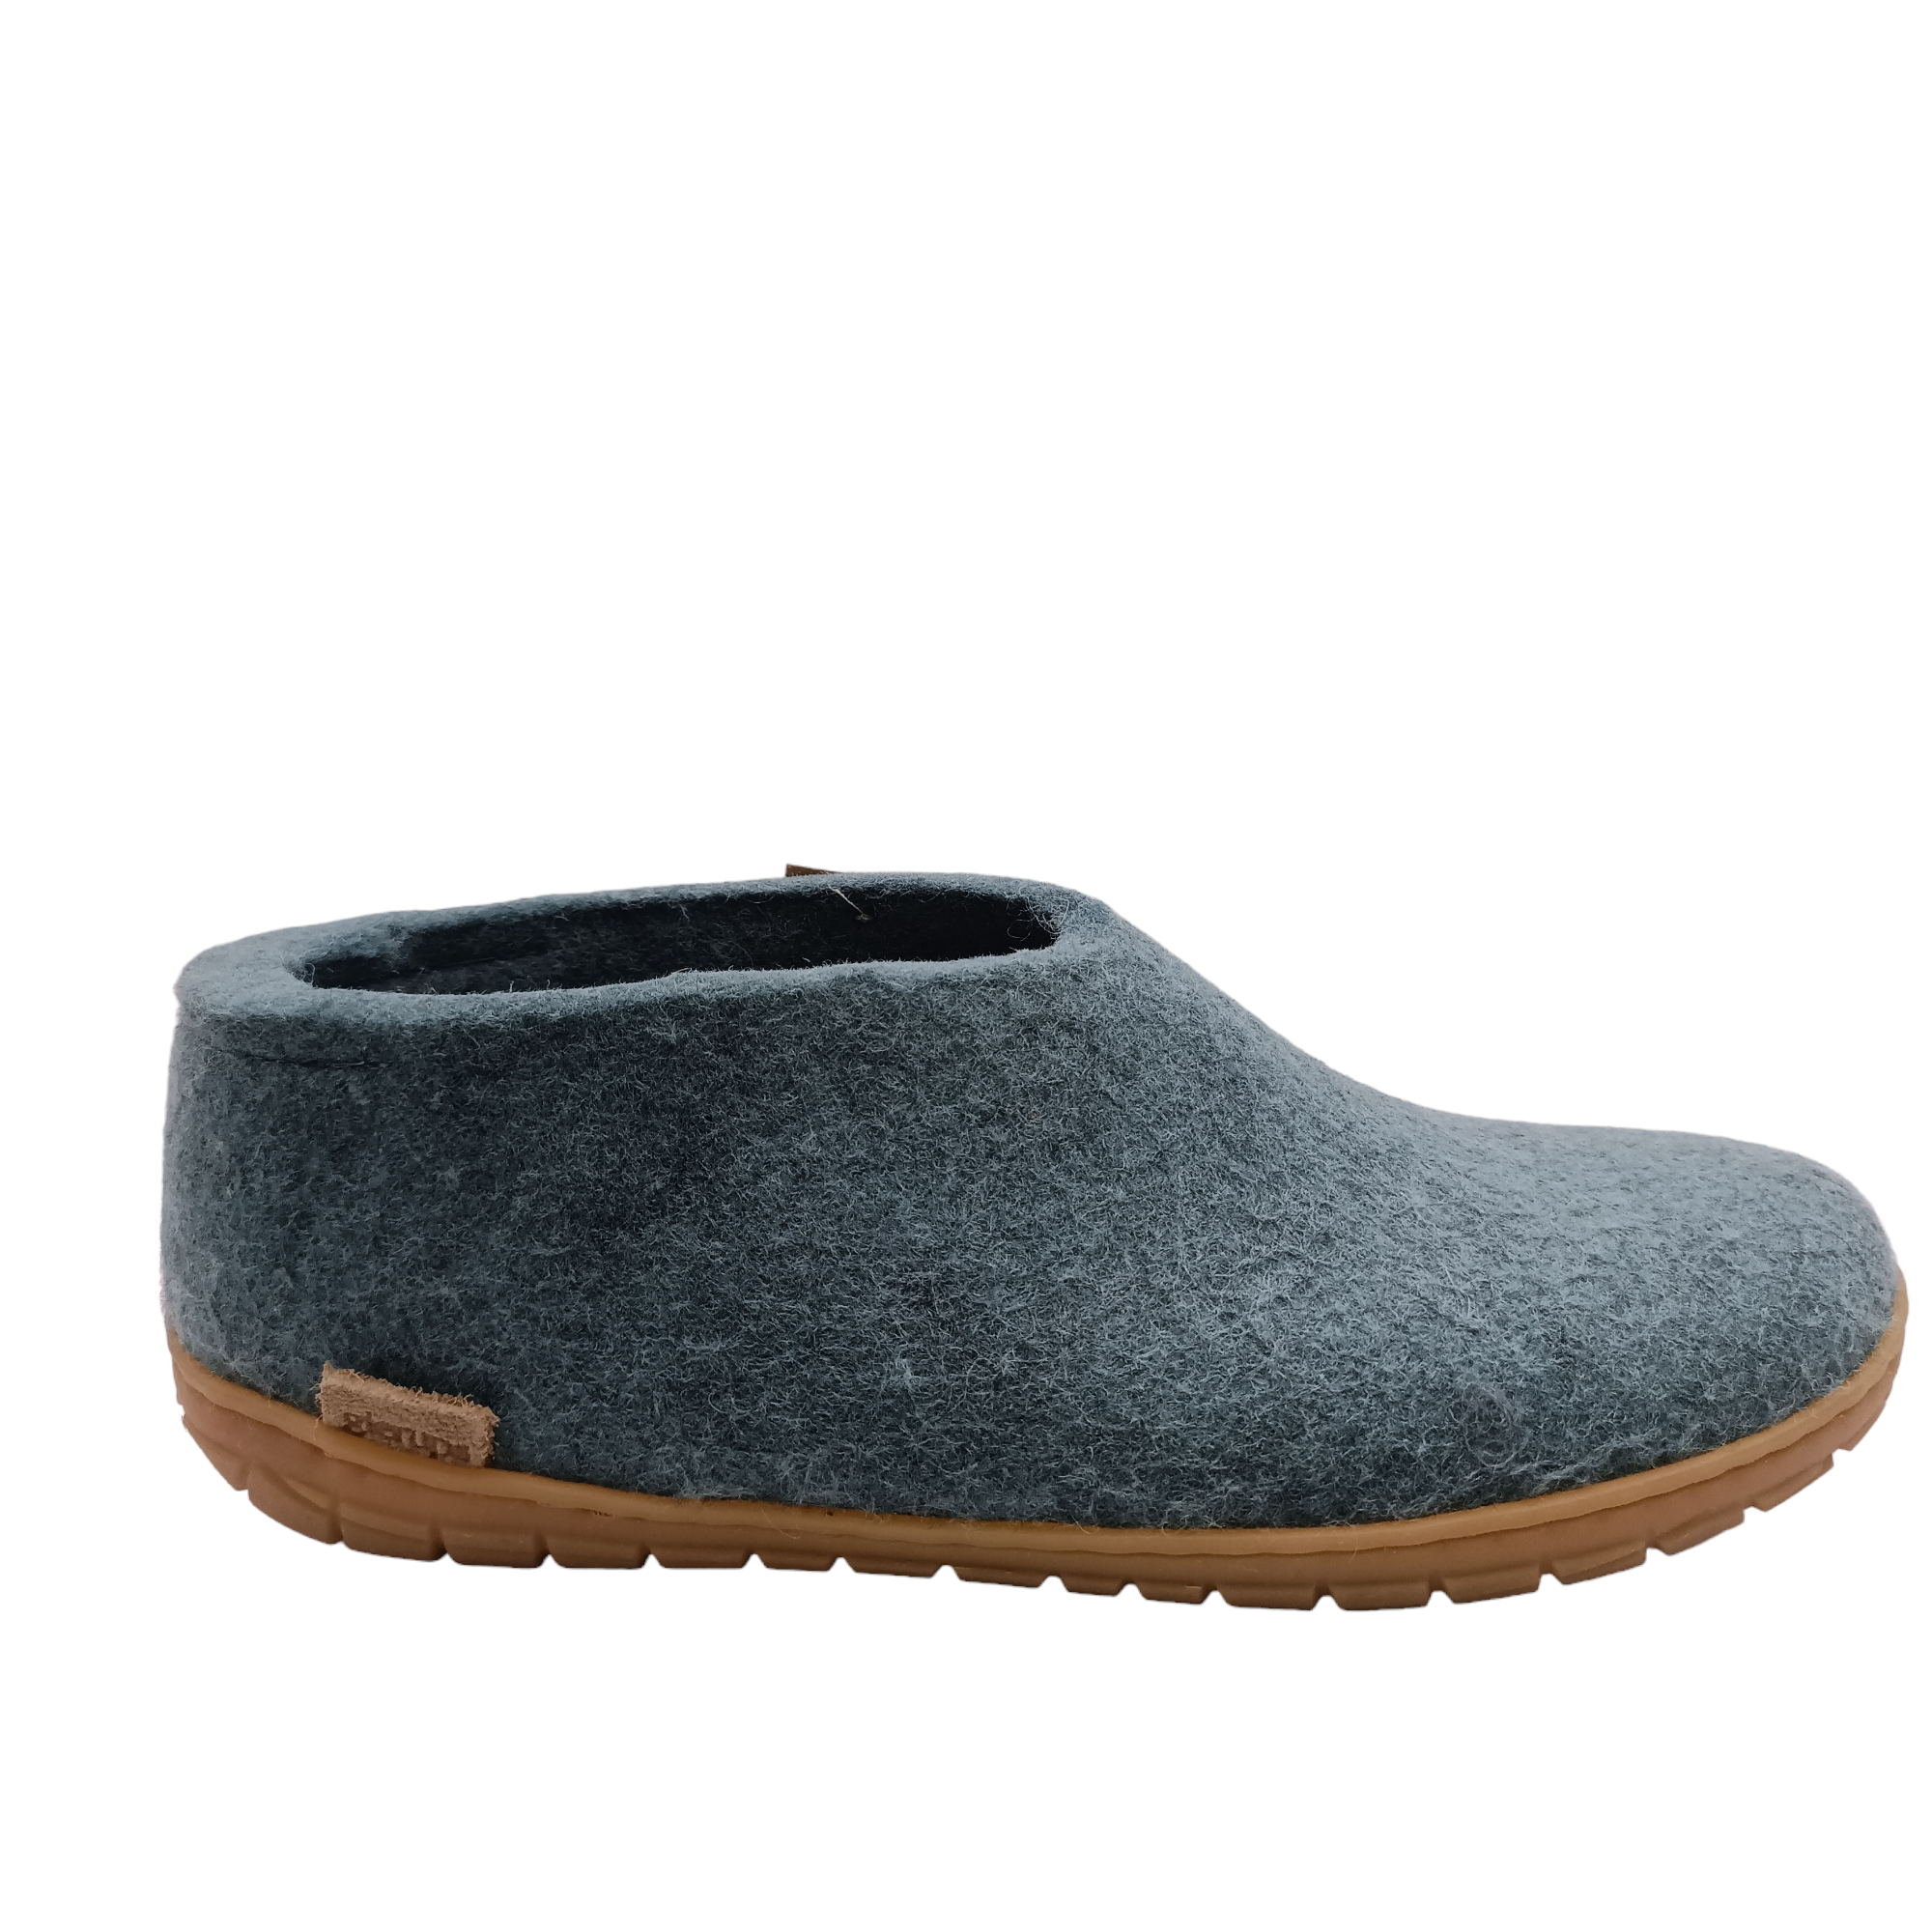 Side view off north sea coloured felt wool Glerup shoe or slipper with natural rubber sole. Shop slippers online and instore with shoe&amp;me Mount Maunganui.